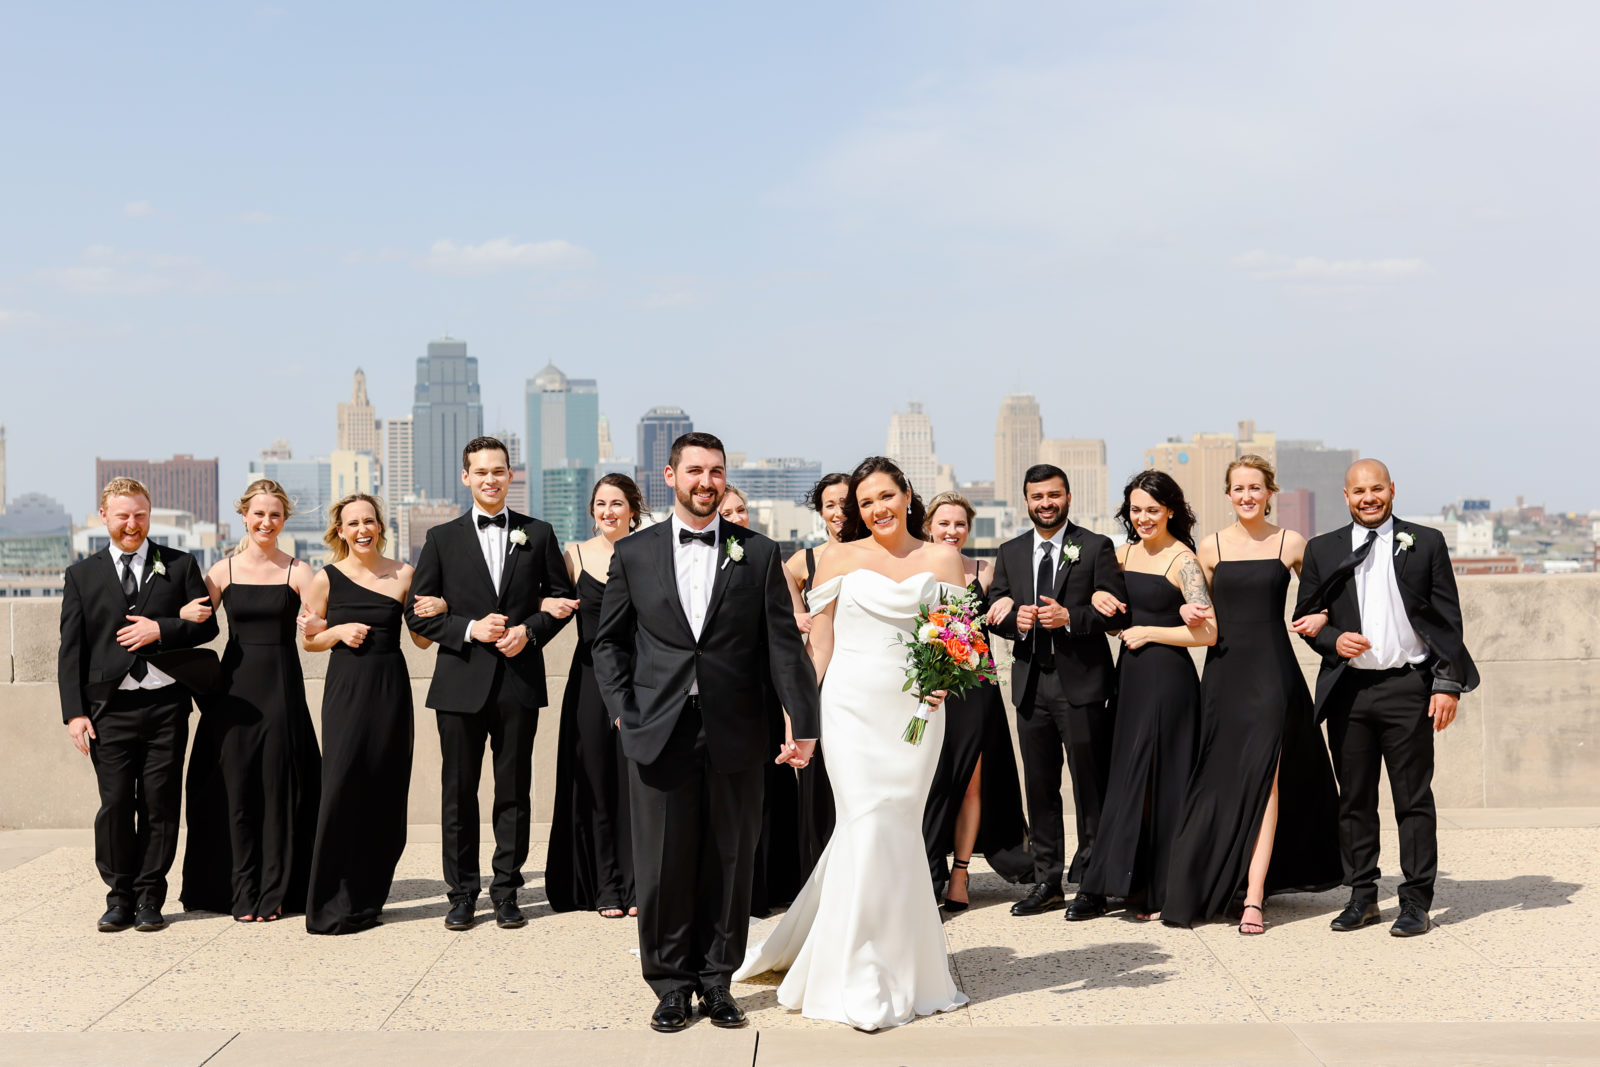 Bridal Party Photos at Liberty Memorial - Kansas City Wedding Photography | Engagement Photo Ideas | Wedding Venues in Kansas and Missouri and St. Louis | 5 Tips on How to Have Family Photos Done Smoothly